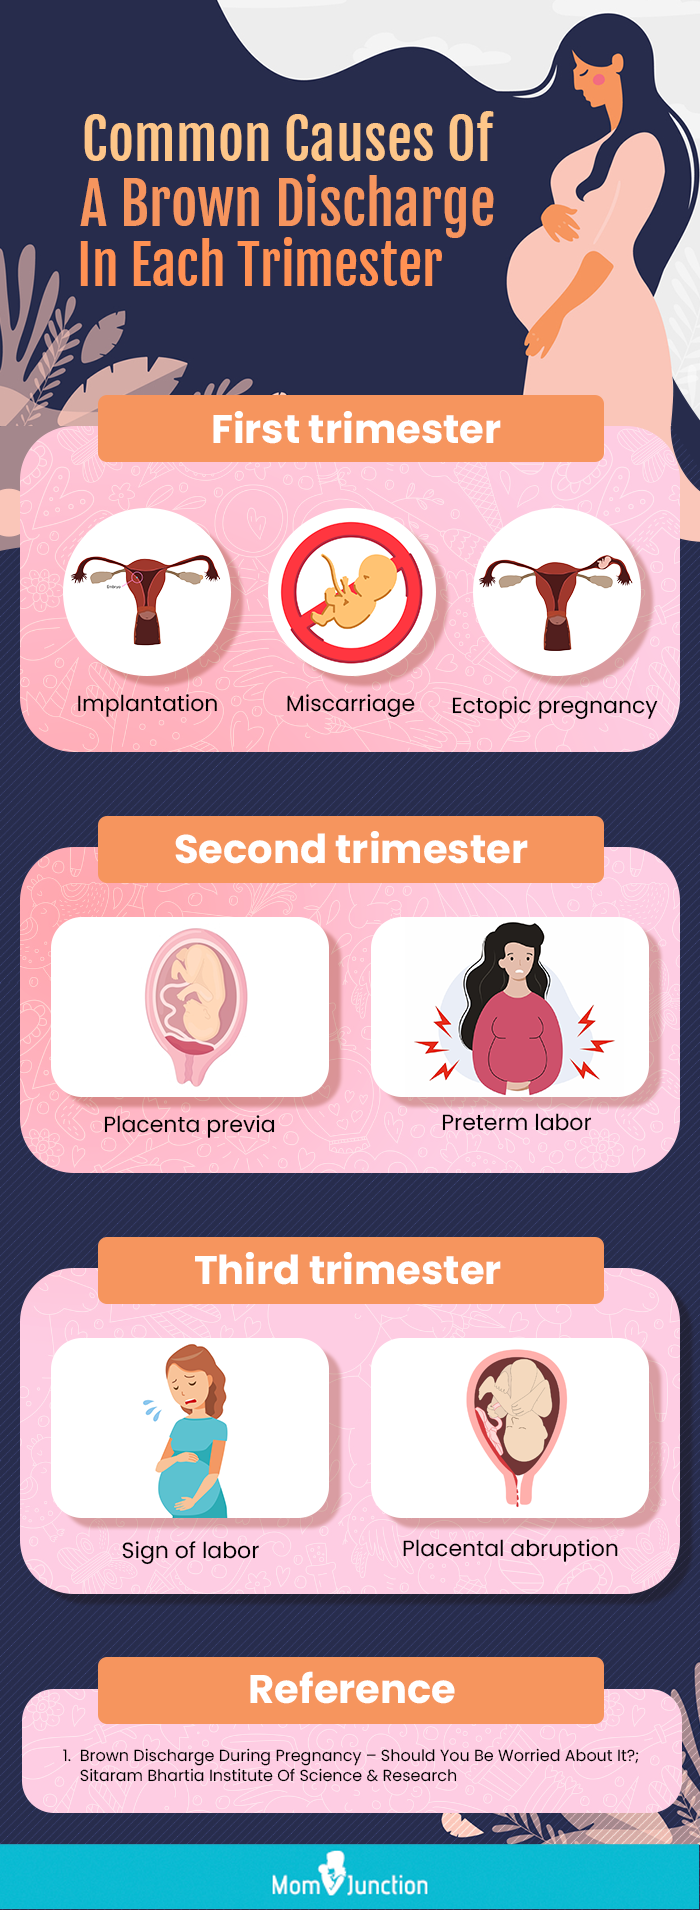 Brown stringy discharge? Waiting for my period after miscarriage